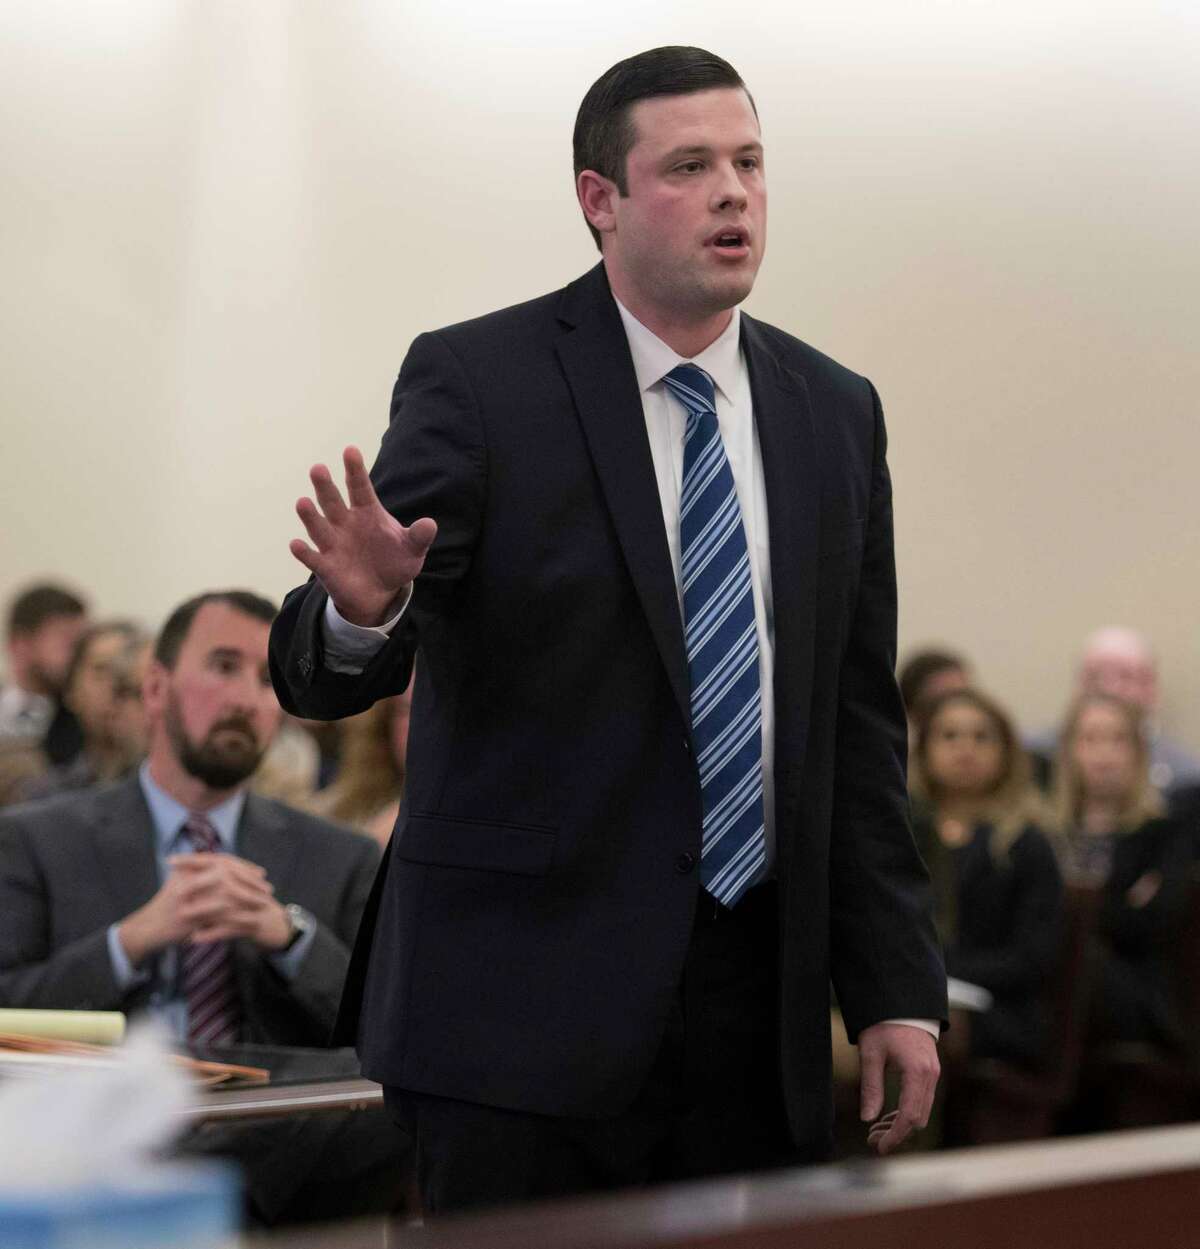 Albany County Assistant District Attorney Steve Sharp speaks during opening arguments in the Mero case in Albany County Court Monday Dec 4, 2017 in Albany, NY. (Skip Dickstein/ Times Union)